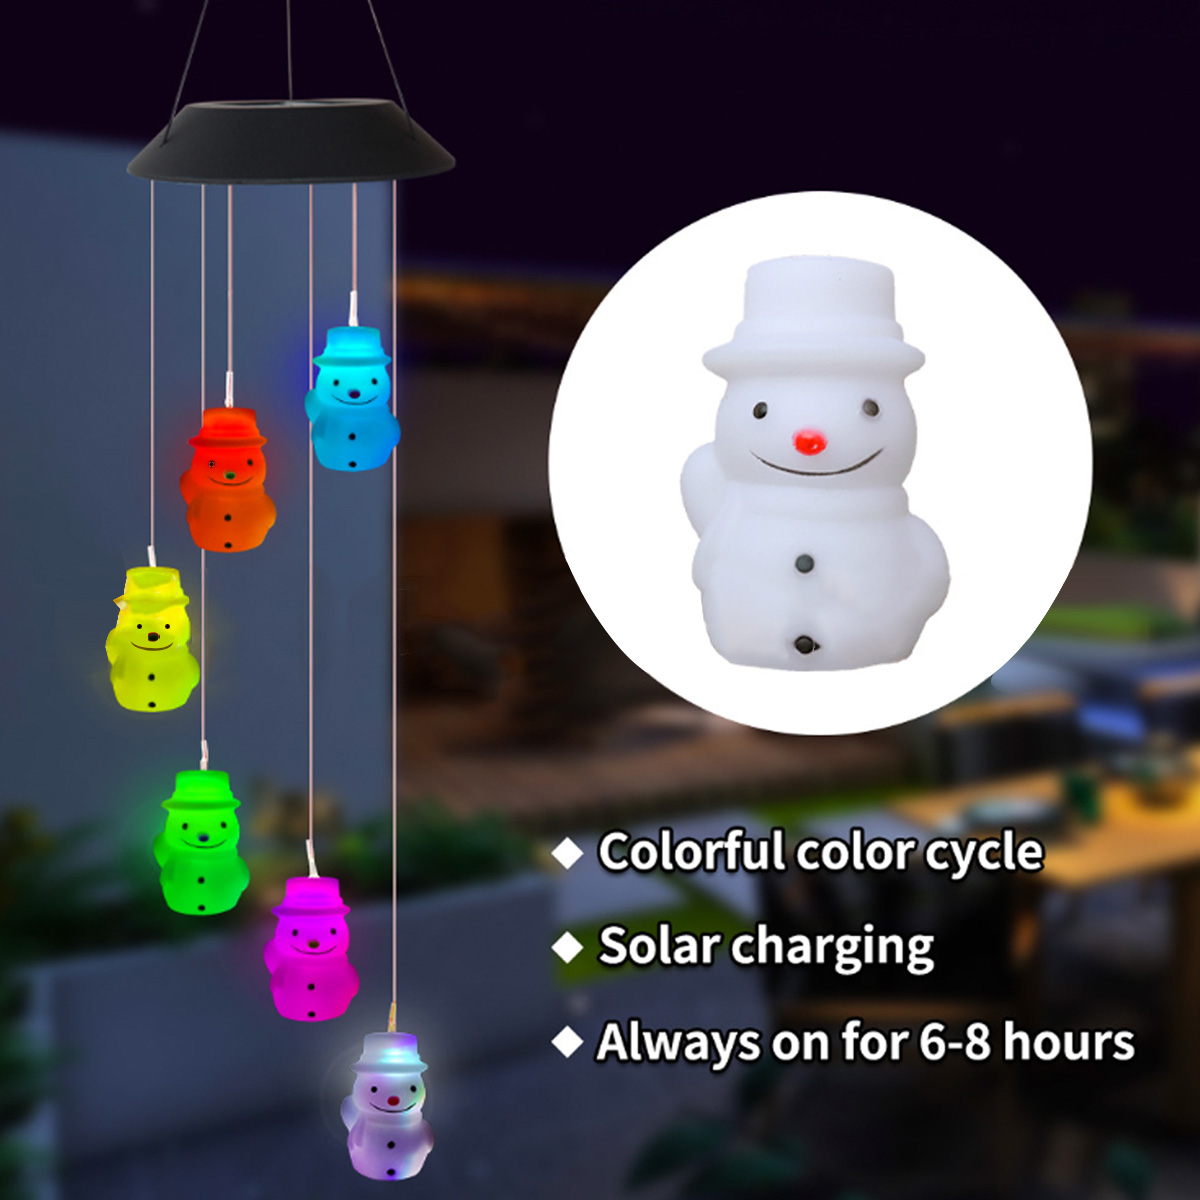 LED-Colour-Changing-Hanging-Wind-Chimes-Solar-Powered-Ball-Lights-Garden-Outdoor-1760757-6